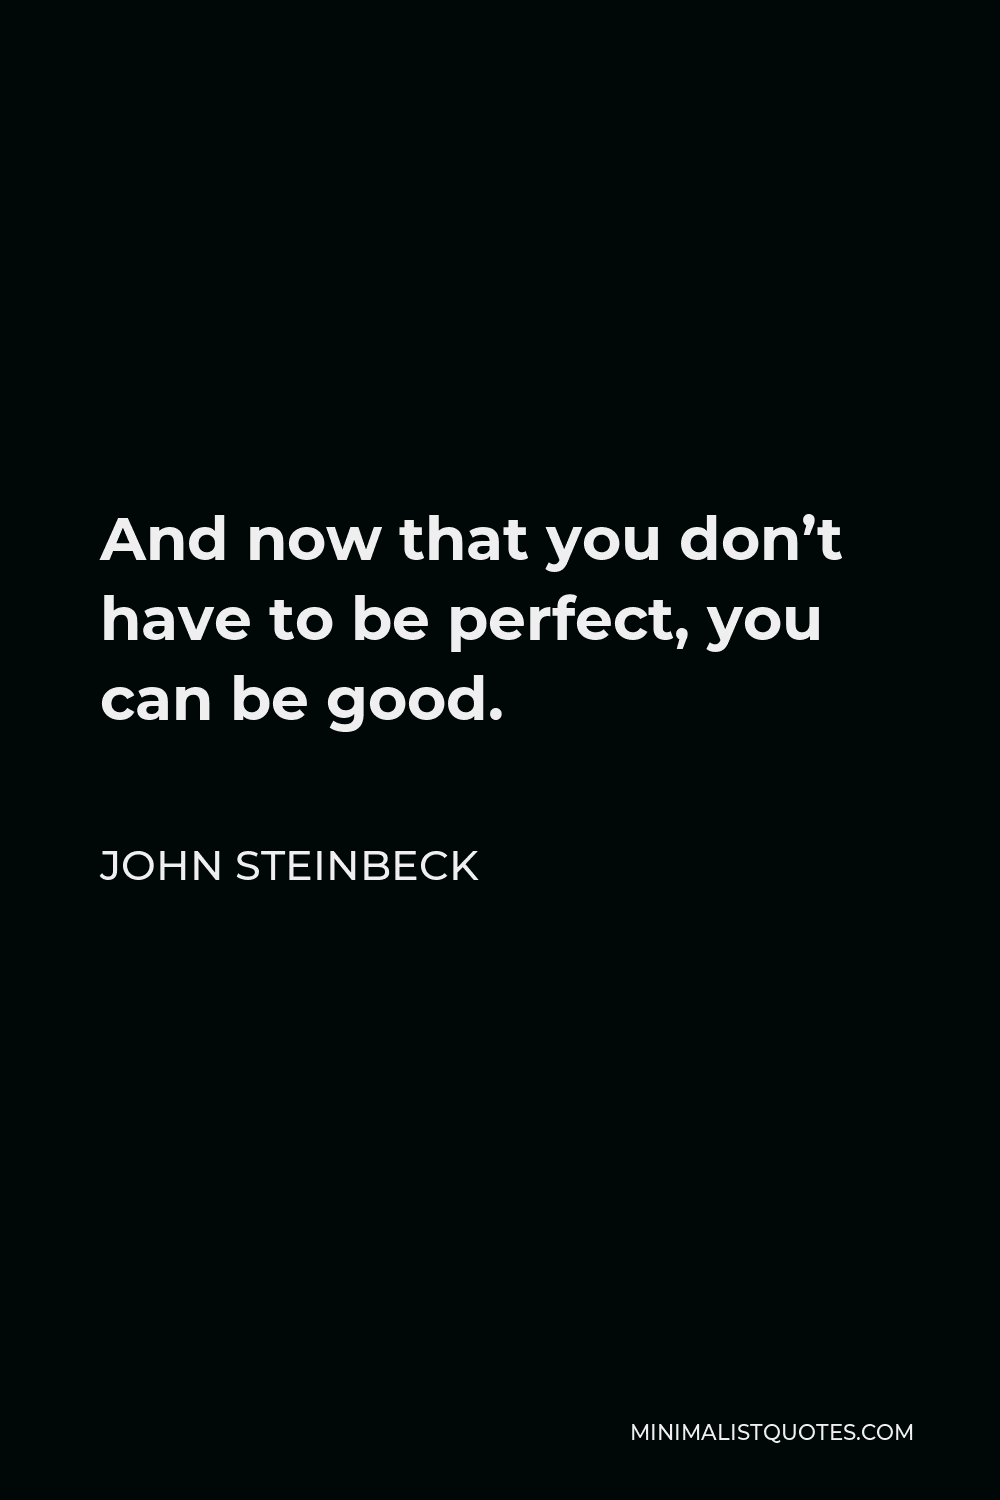 John Steinbeck Quote - And now that you don’t have to be perfect, you can be good.